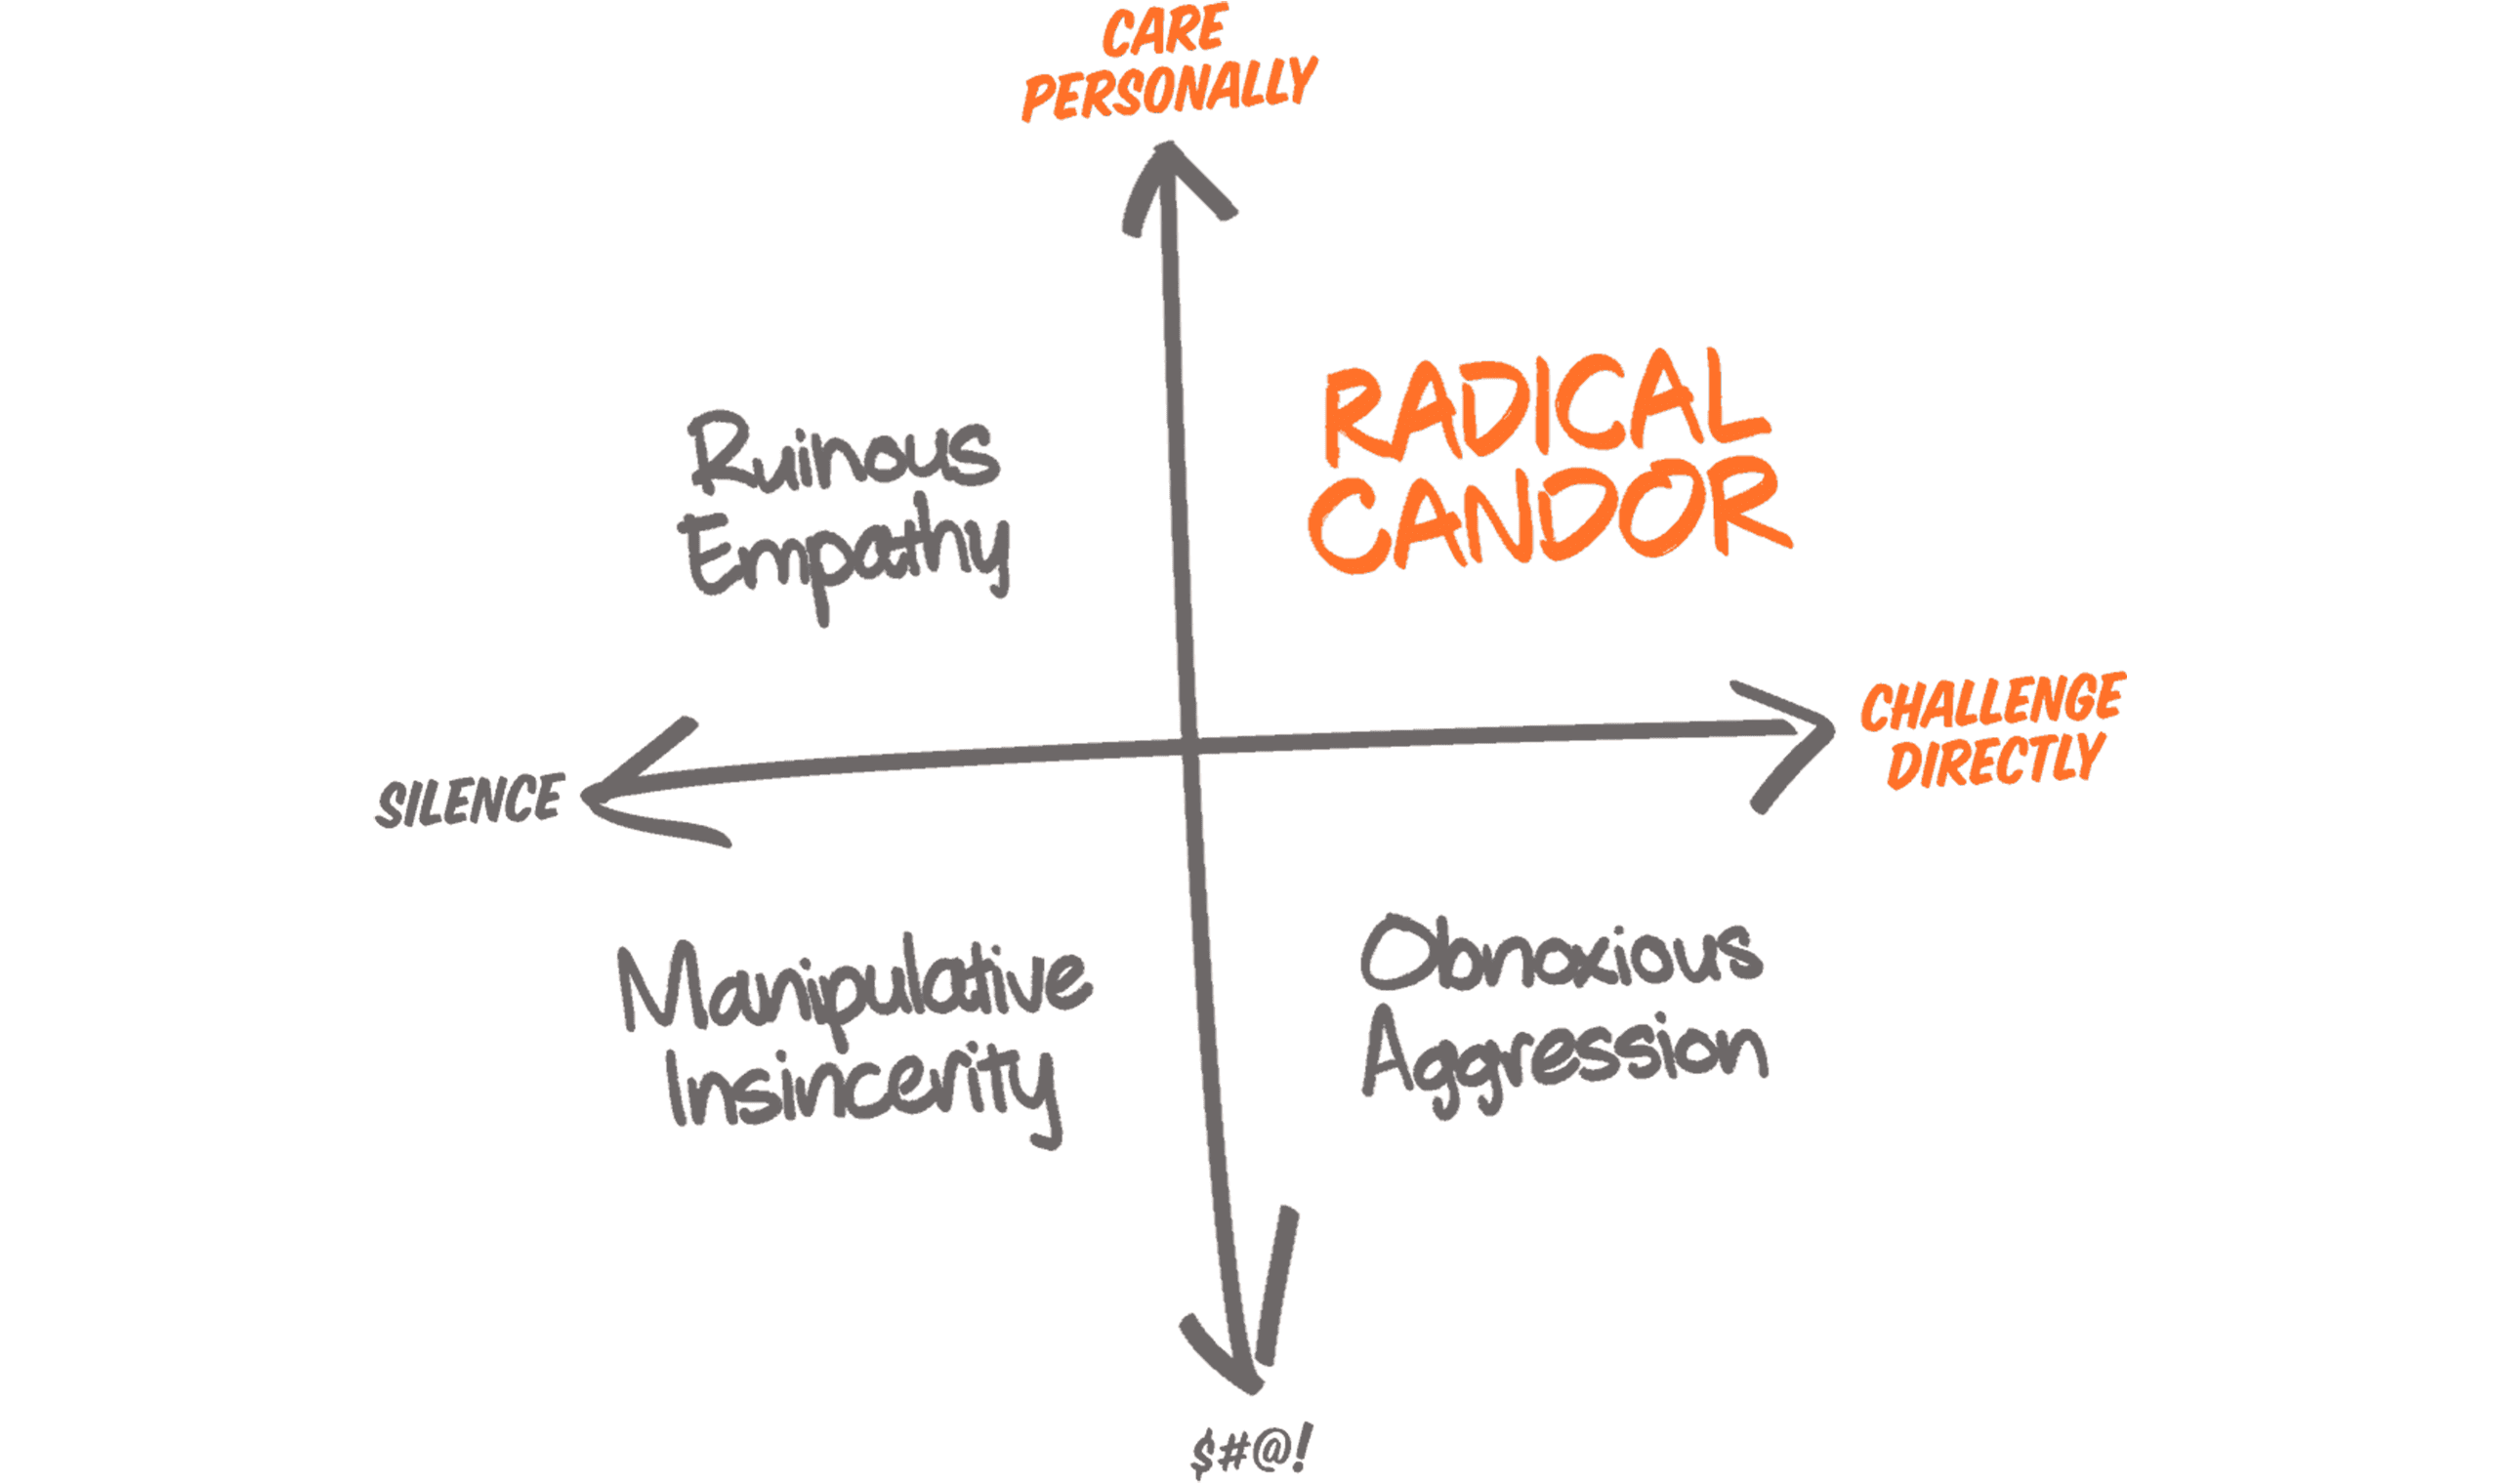 Listener Numbers, Contacts, Similar Podcasts - Radical Candor